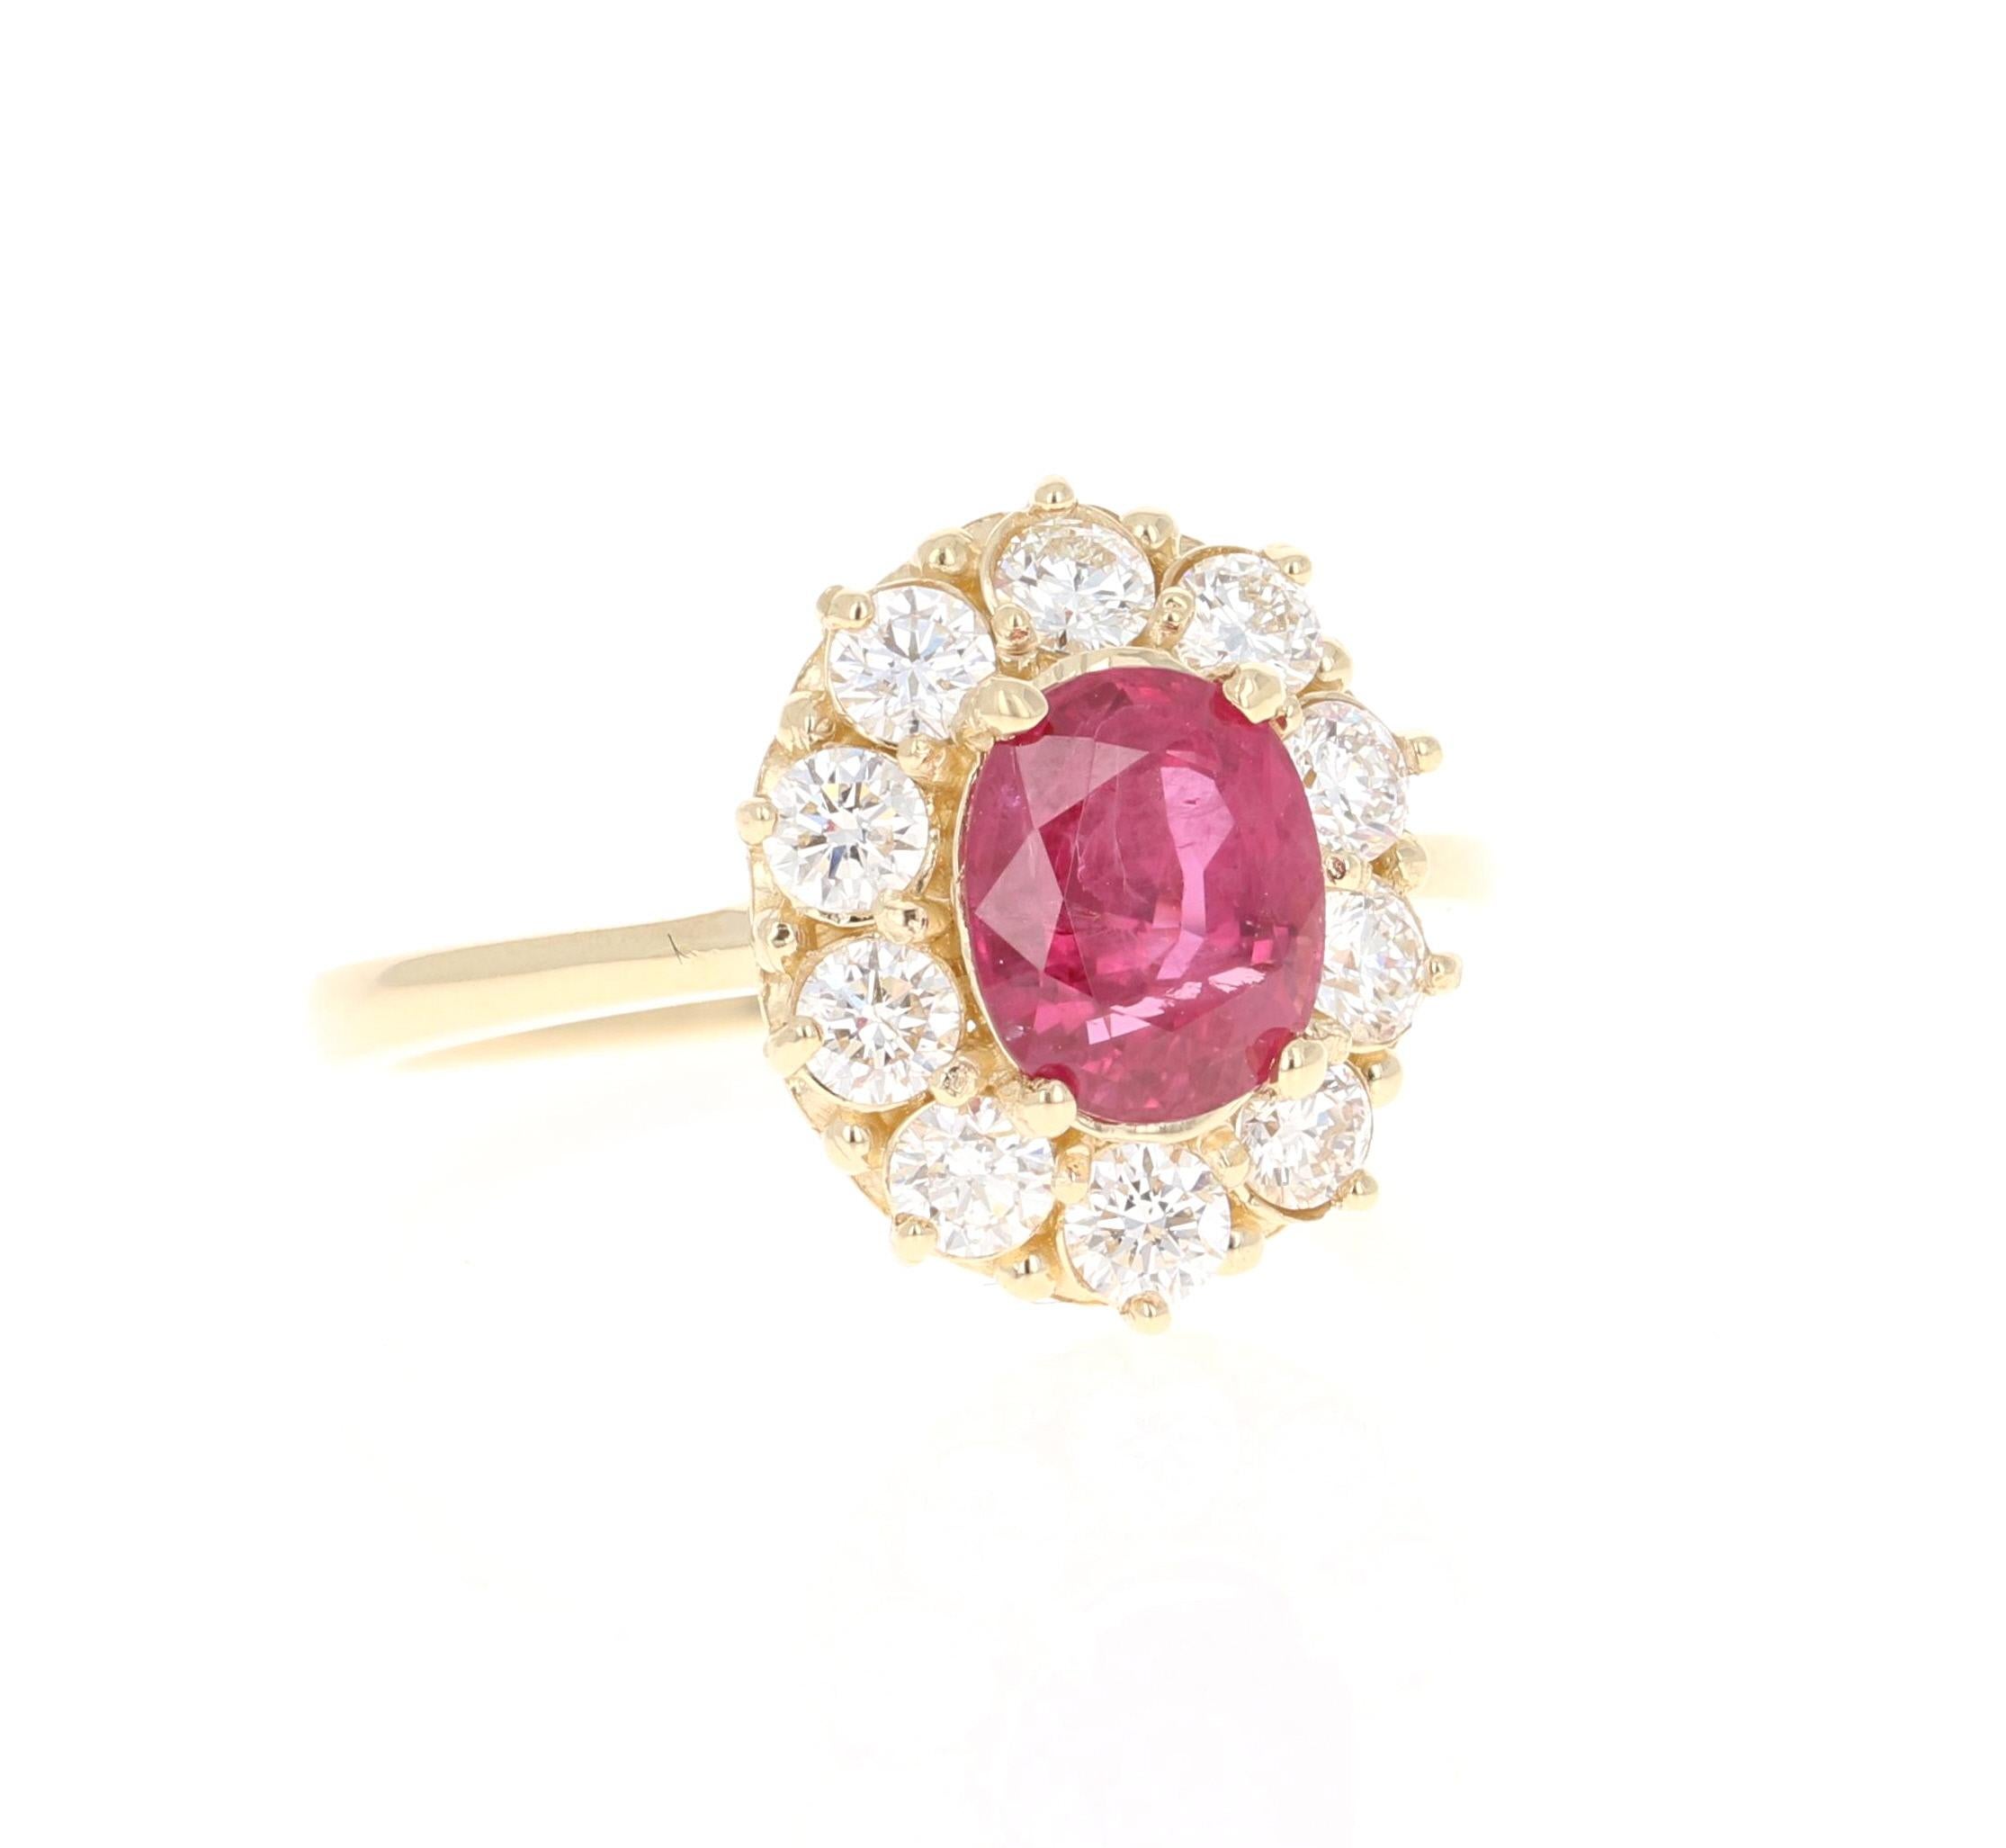 Beautiful Ballerina Ruby Diamond Ring with a Natural Oval Cut 1.66 Carat Ruby which is surrounded by 10 Round Cut Diamonds that weigh 0.81 carats. The total carat weight of the ring is 2.47 carats. The clarity and color of the diamonds are SI1-F.